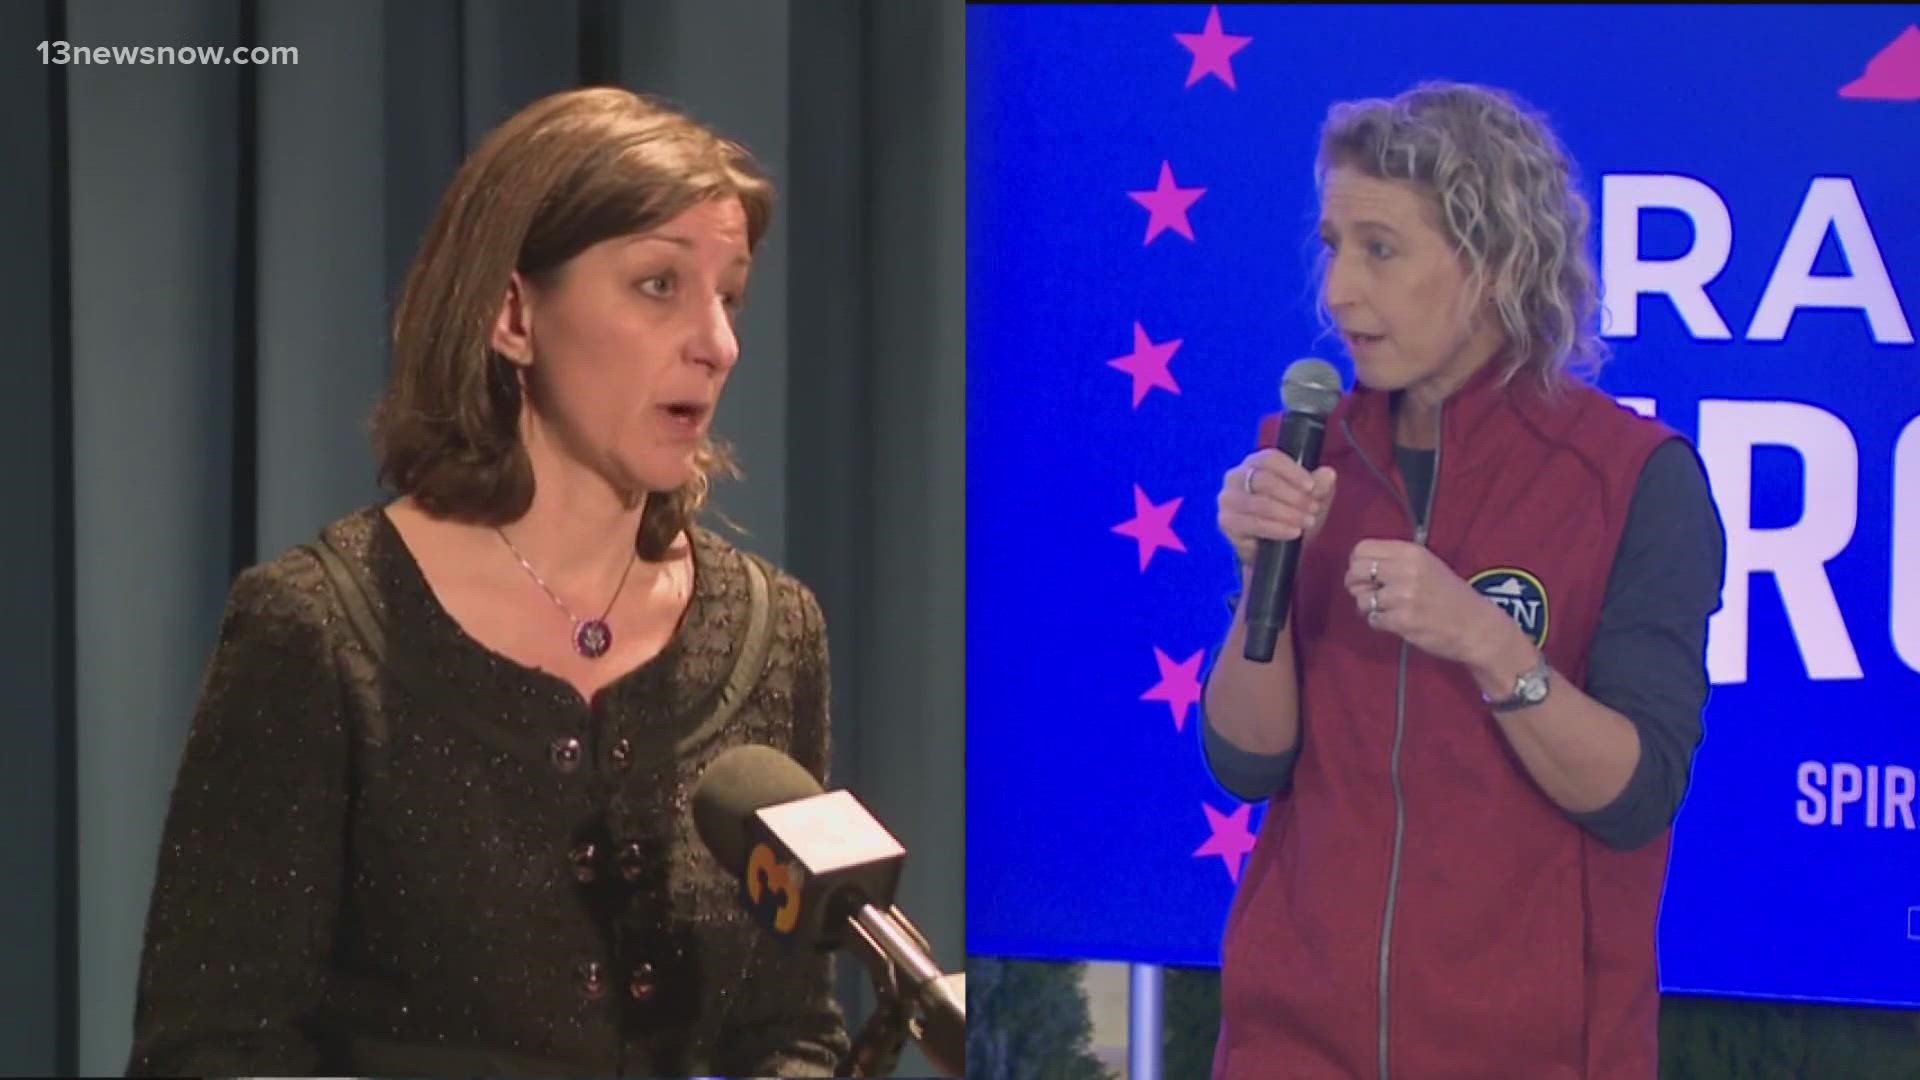 We found a combined $13.5 million spent so far on advertising in the District 2 race between Democratic Rep. Elaine Luria and Republican State Senator Jen Kiggans.